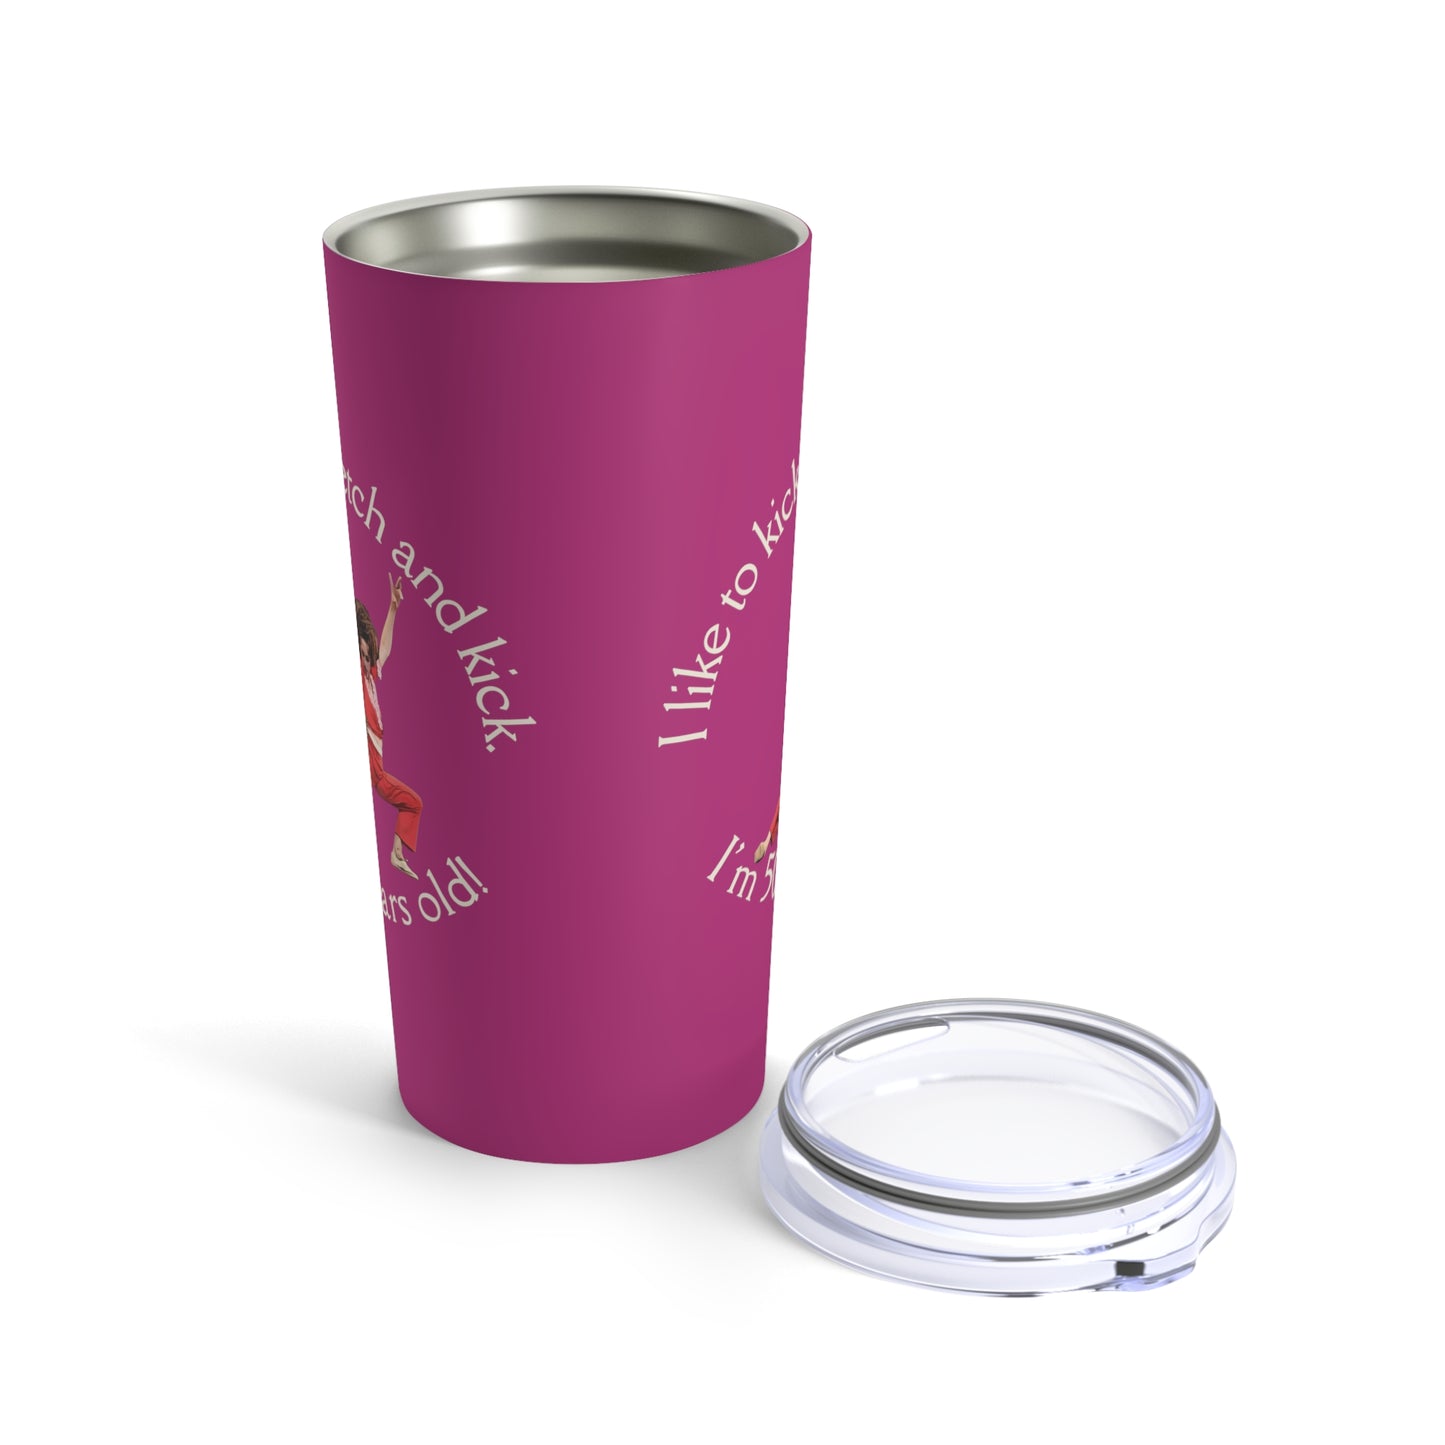 Pink Tumbler 20oz, I'm 50, Sally O'Malley Tumbler, Molly Shannon, I like to Kick and Stretch